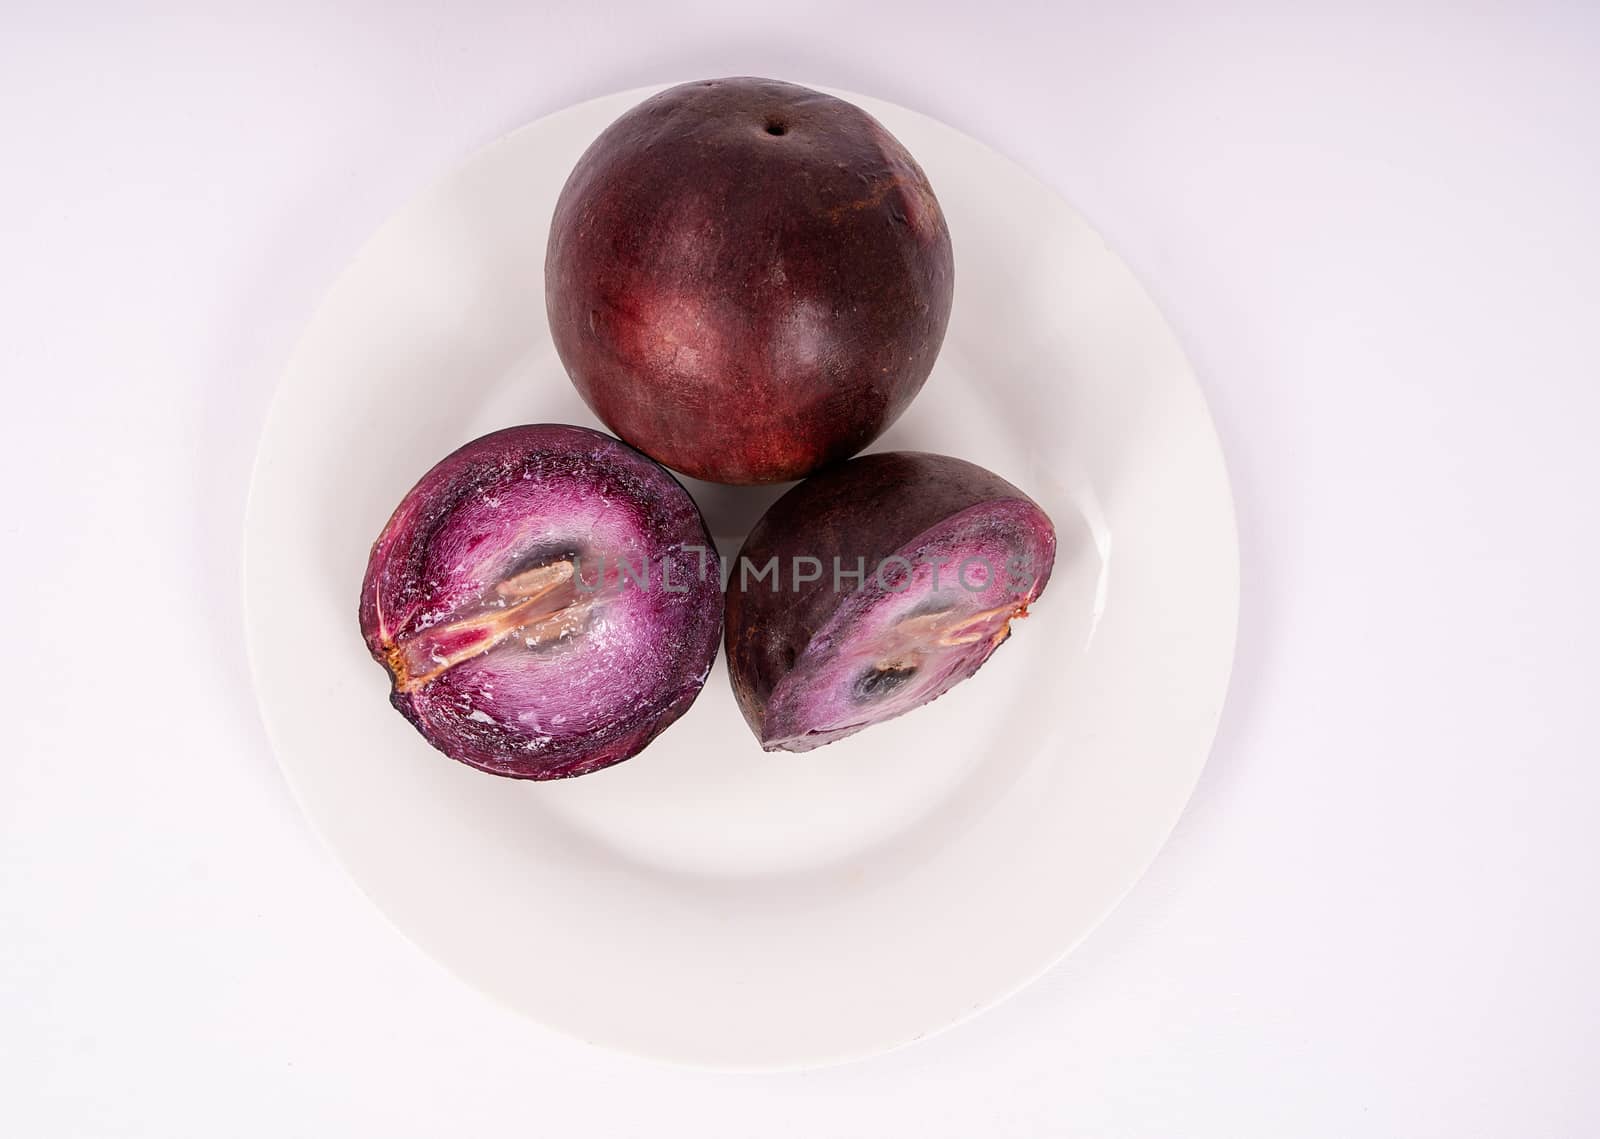 Two caimito fruit on a plate, one of them cut in two